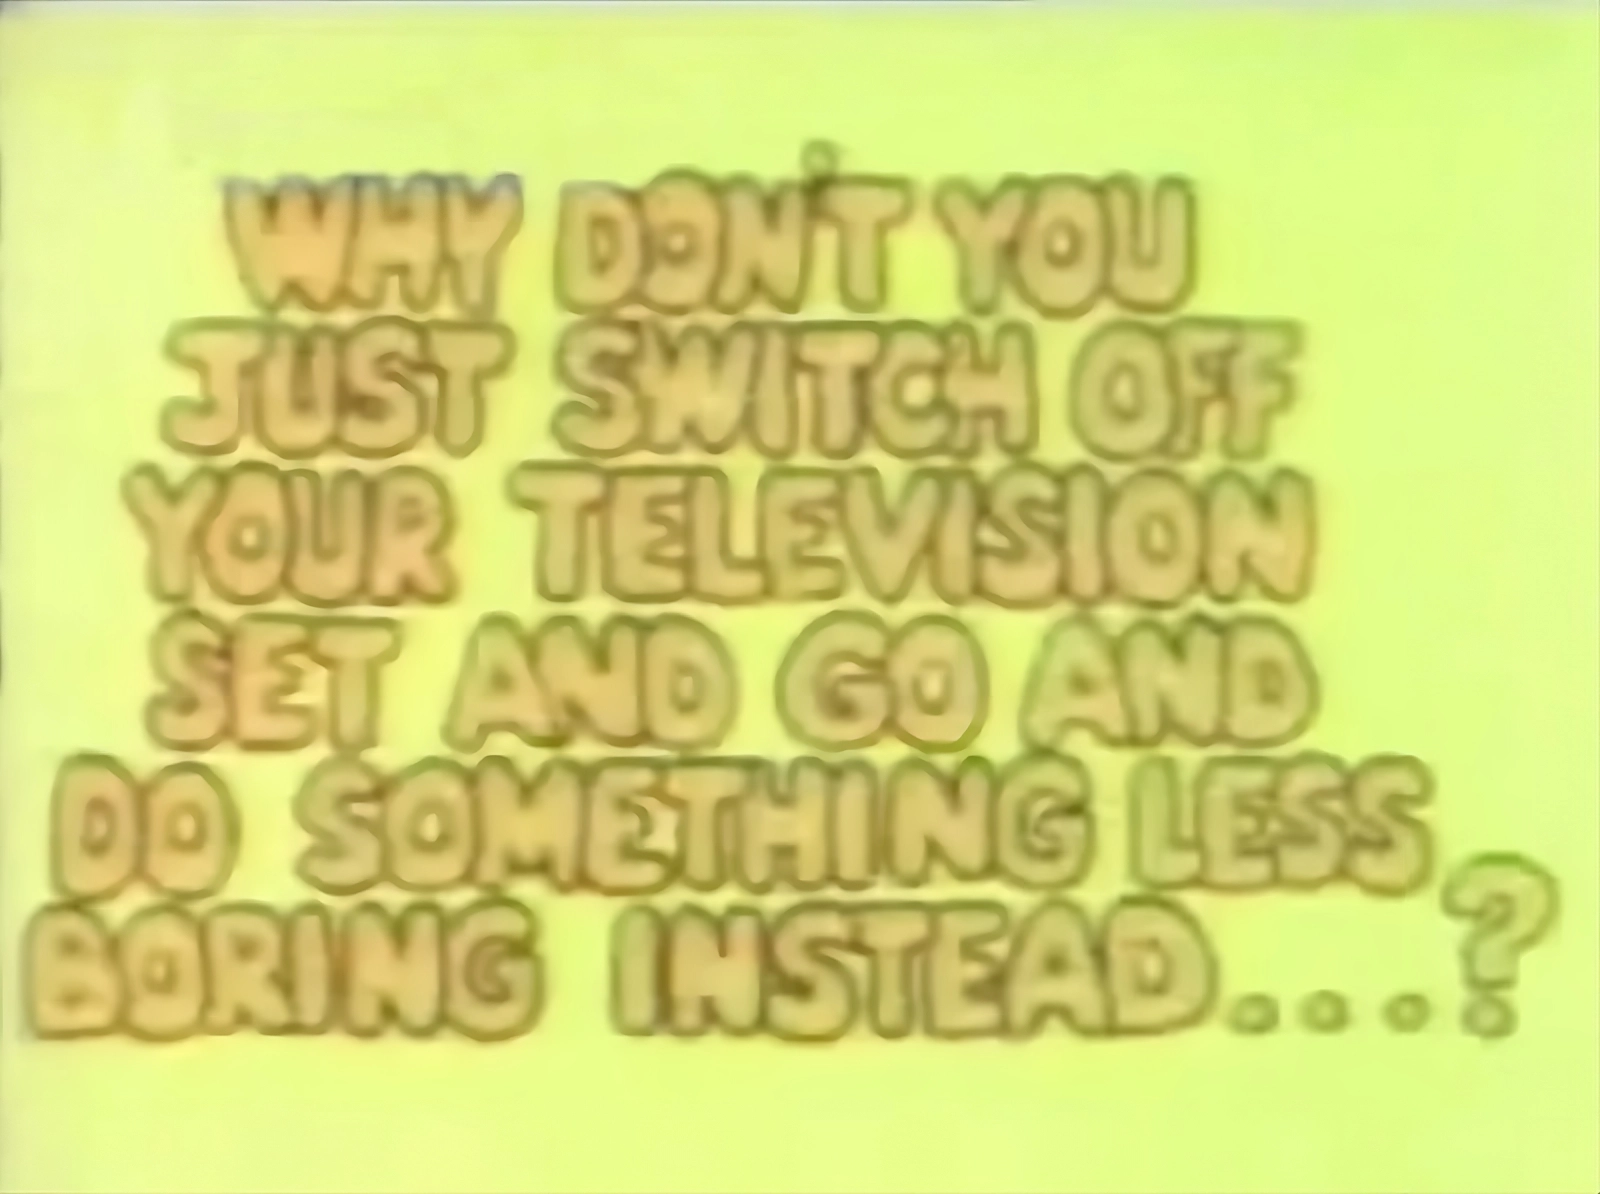 Orange text on yellow background: 'Why don't you just switch off your television set and go and do something less boring instead...?' 